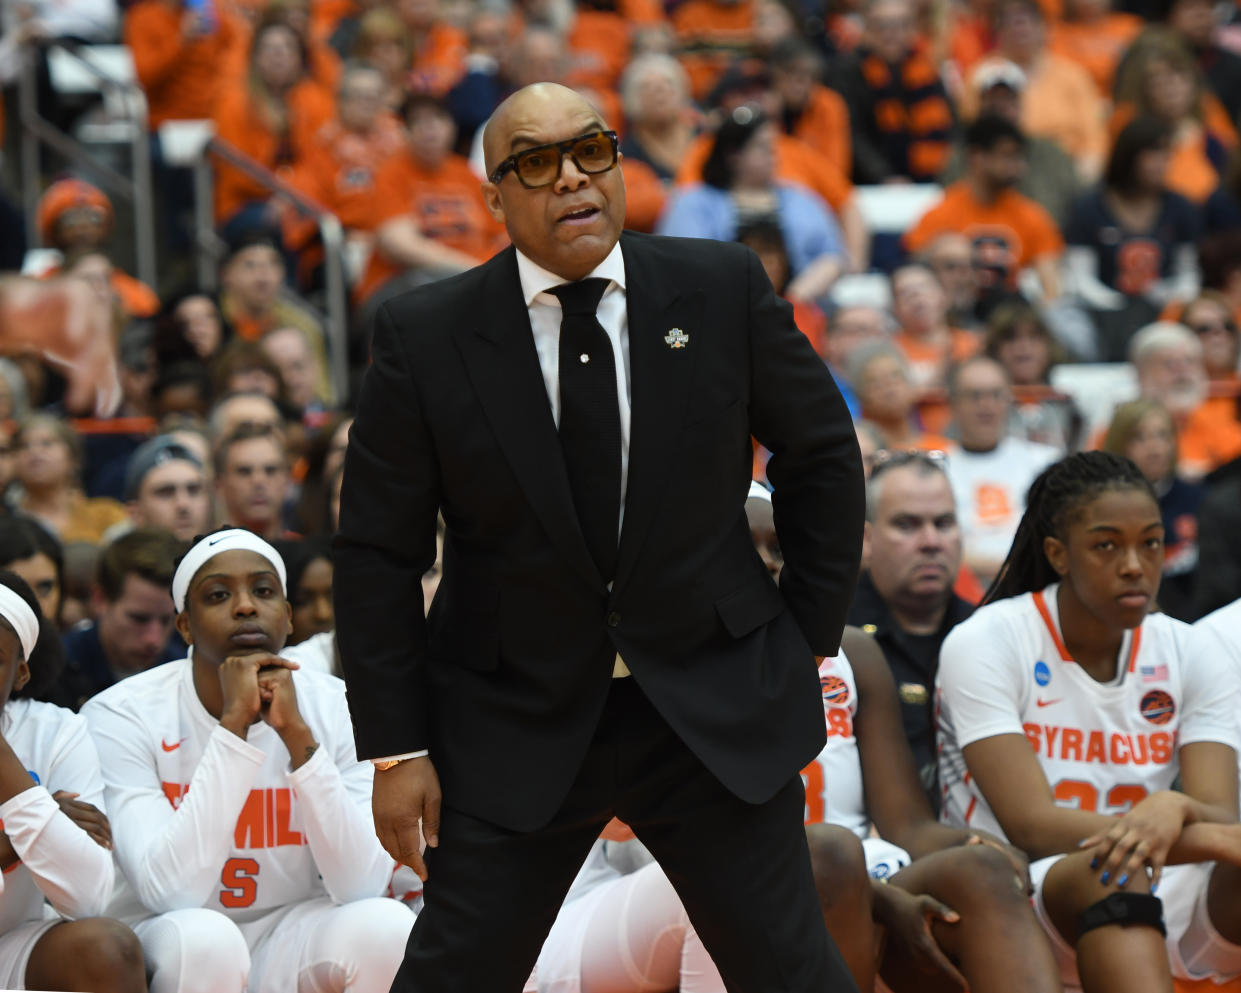 SYRACUSE, NY - MARCH 23: Syracuse Orange Head Coach Quentin Hillsman looks on from the sidelines during the second half of the game between the Fordham Rams and the Syracuse Orange on March 23, 2019, at the Carrier Dome in Syracuse, NY. (Photo by Gregory Fisher/Icon Sportswire via Getty Images)